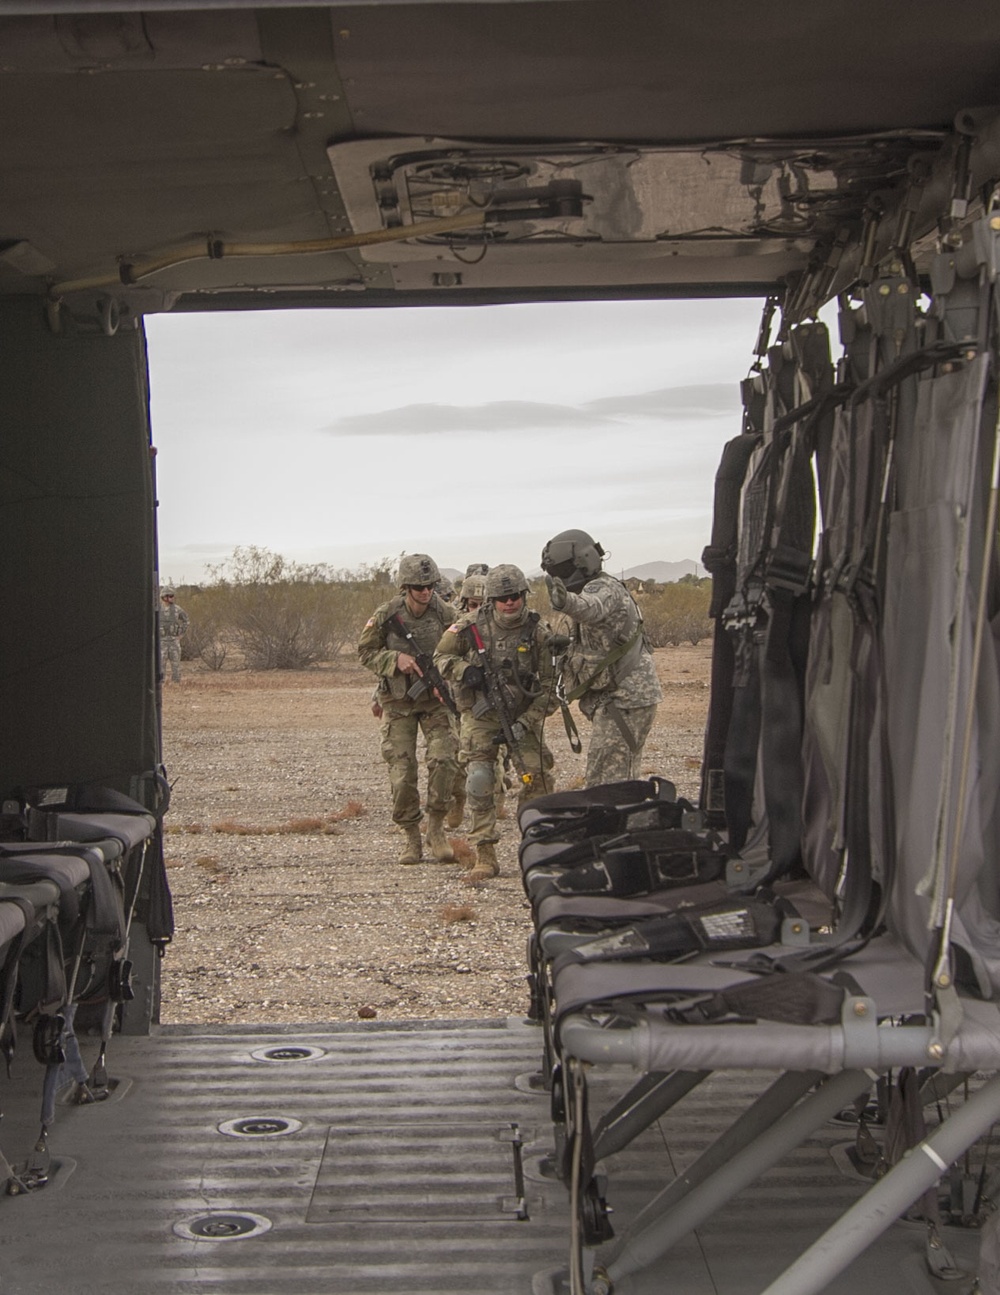 Infantry, Aviation collaborate to prepare Soldiers for air assault operations